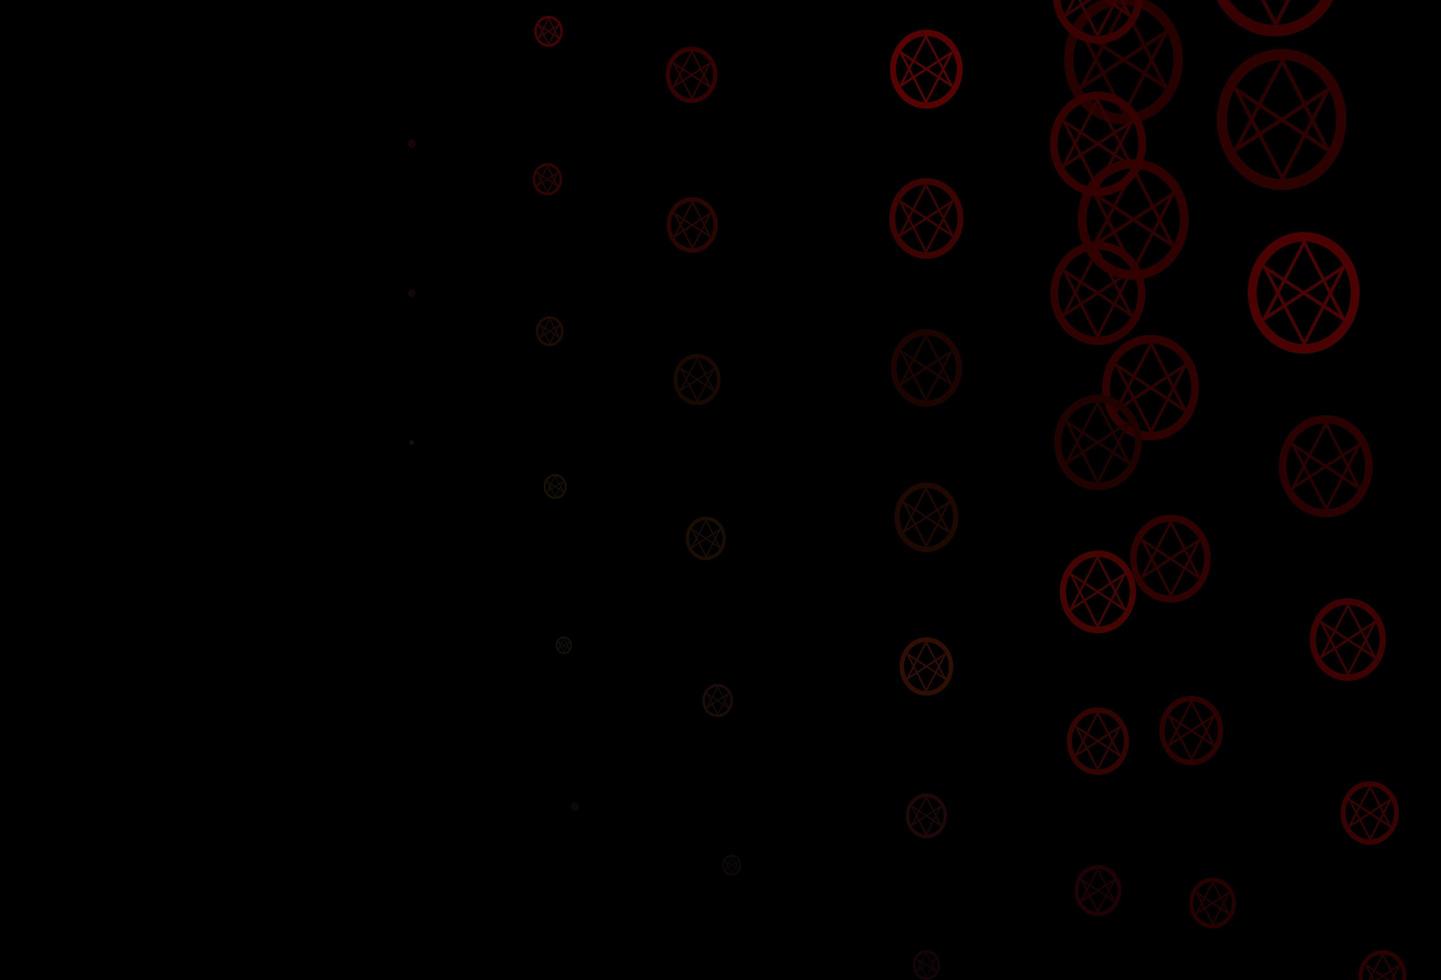 Dark Green, Red vector background with occult symbols.